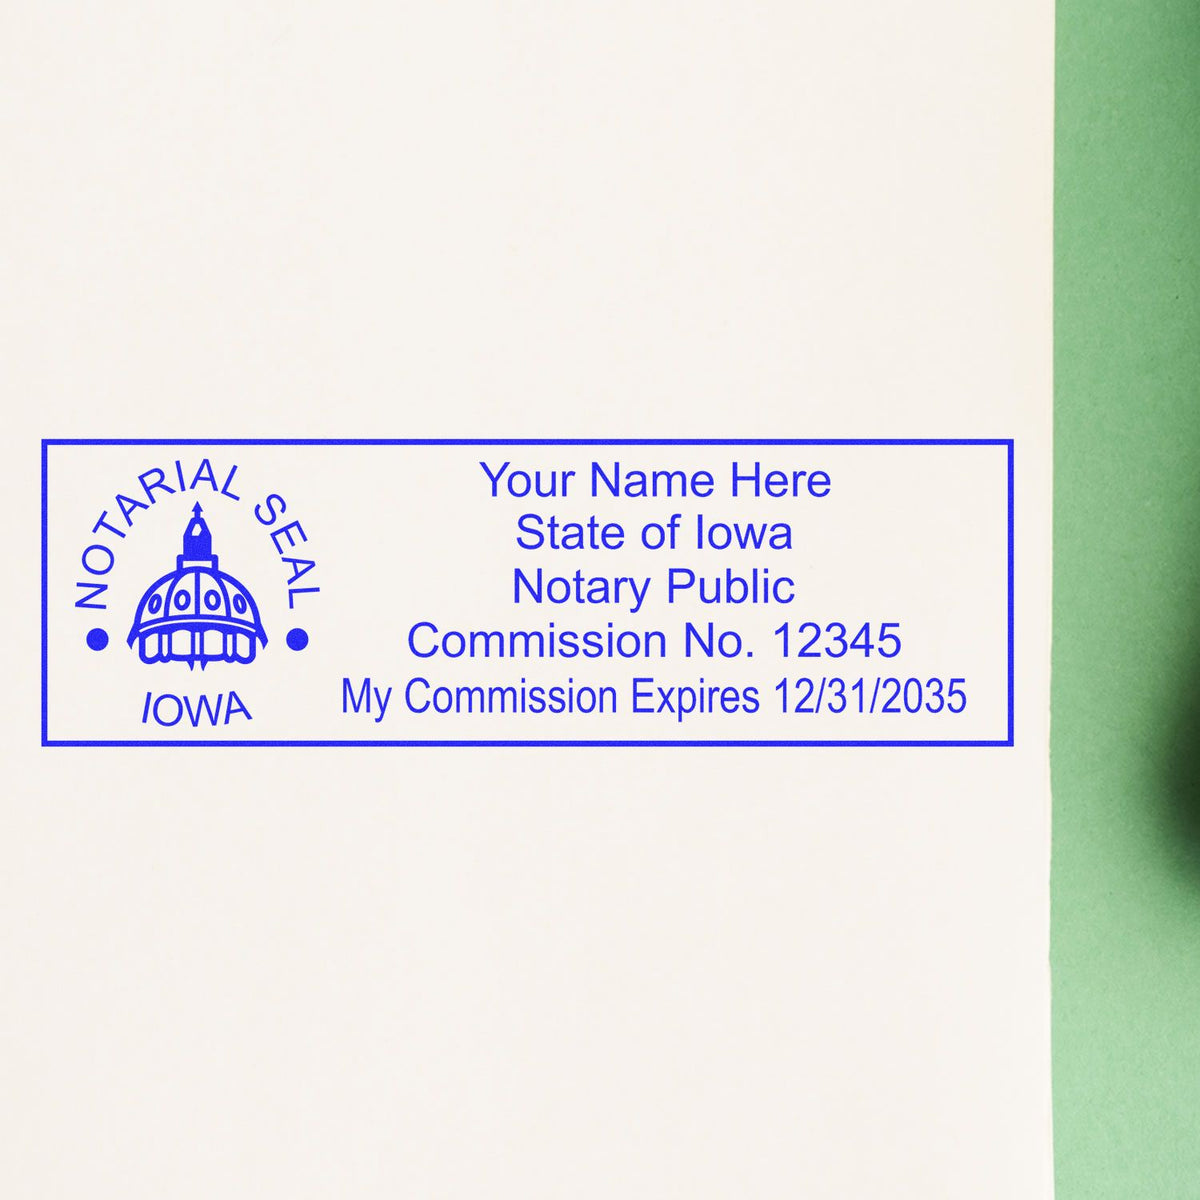 This paper is stamped with a sample imprint of the Slim Pre-Inked State Seal Notary Stamp for Iowa, signifying its quality and reliability.